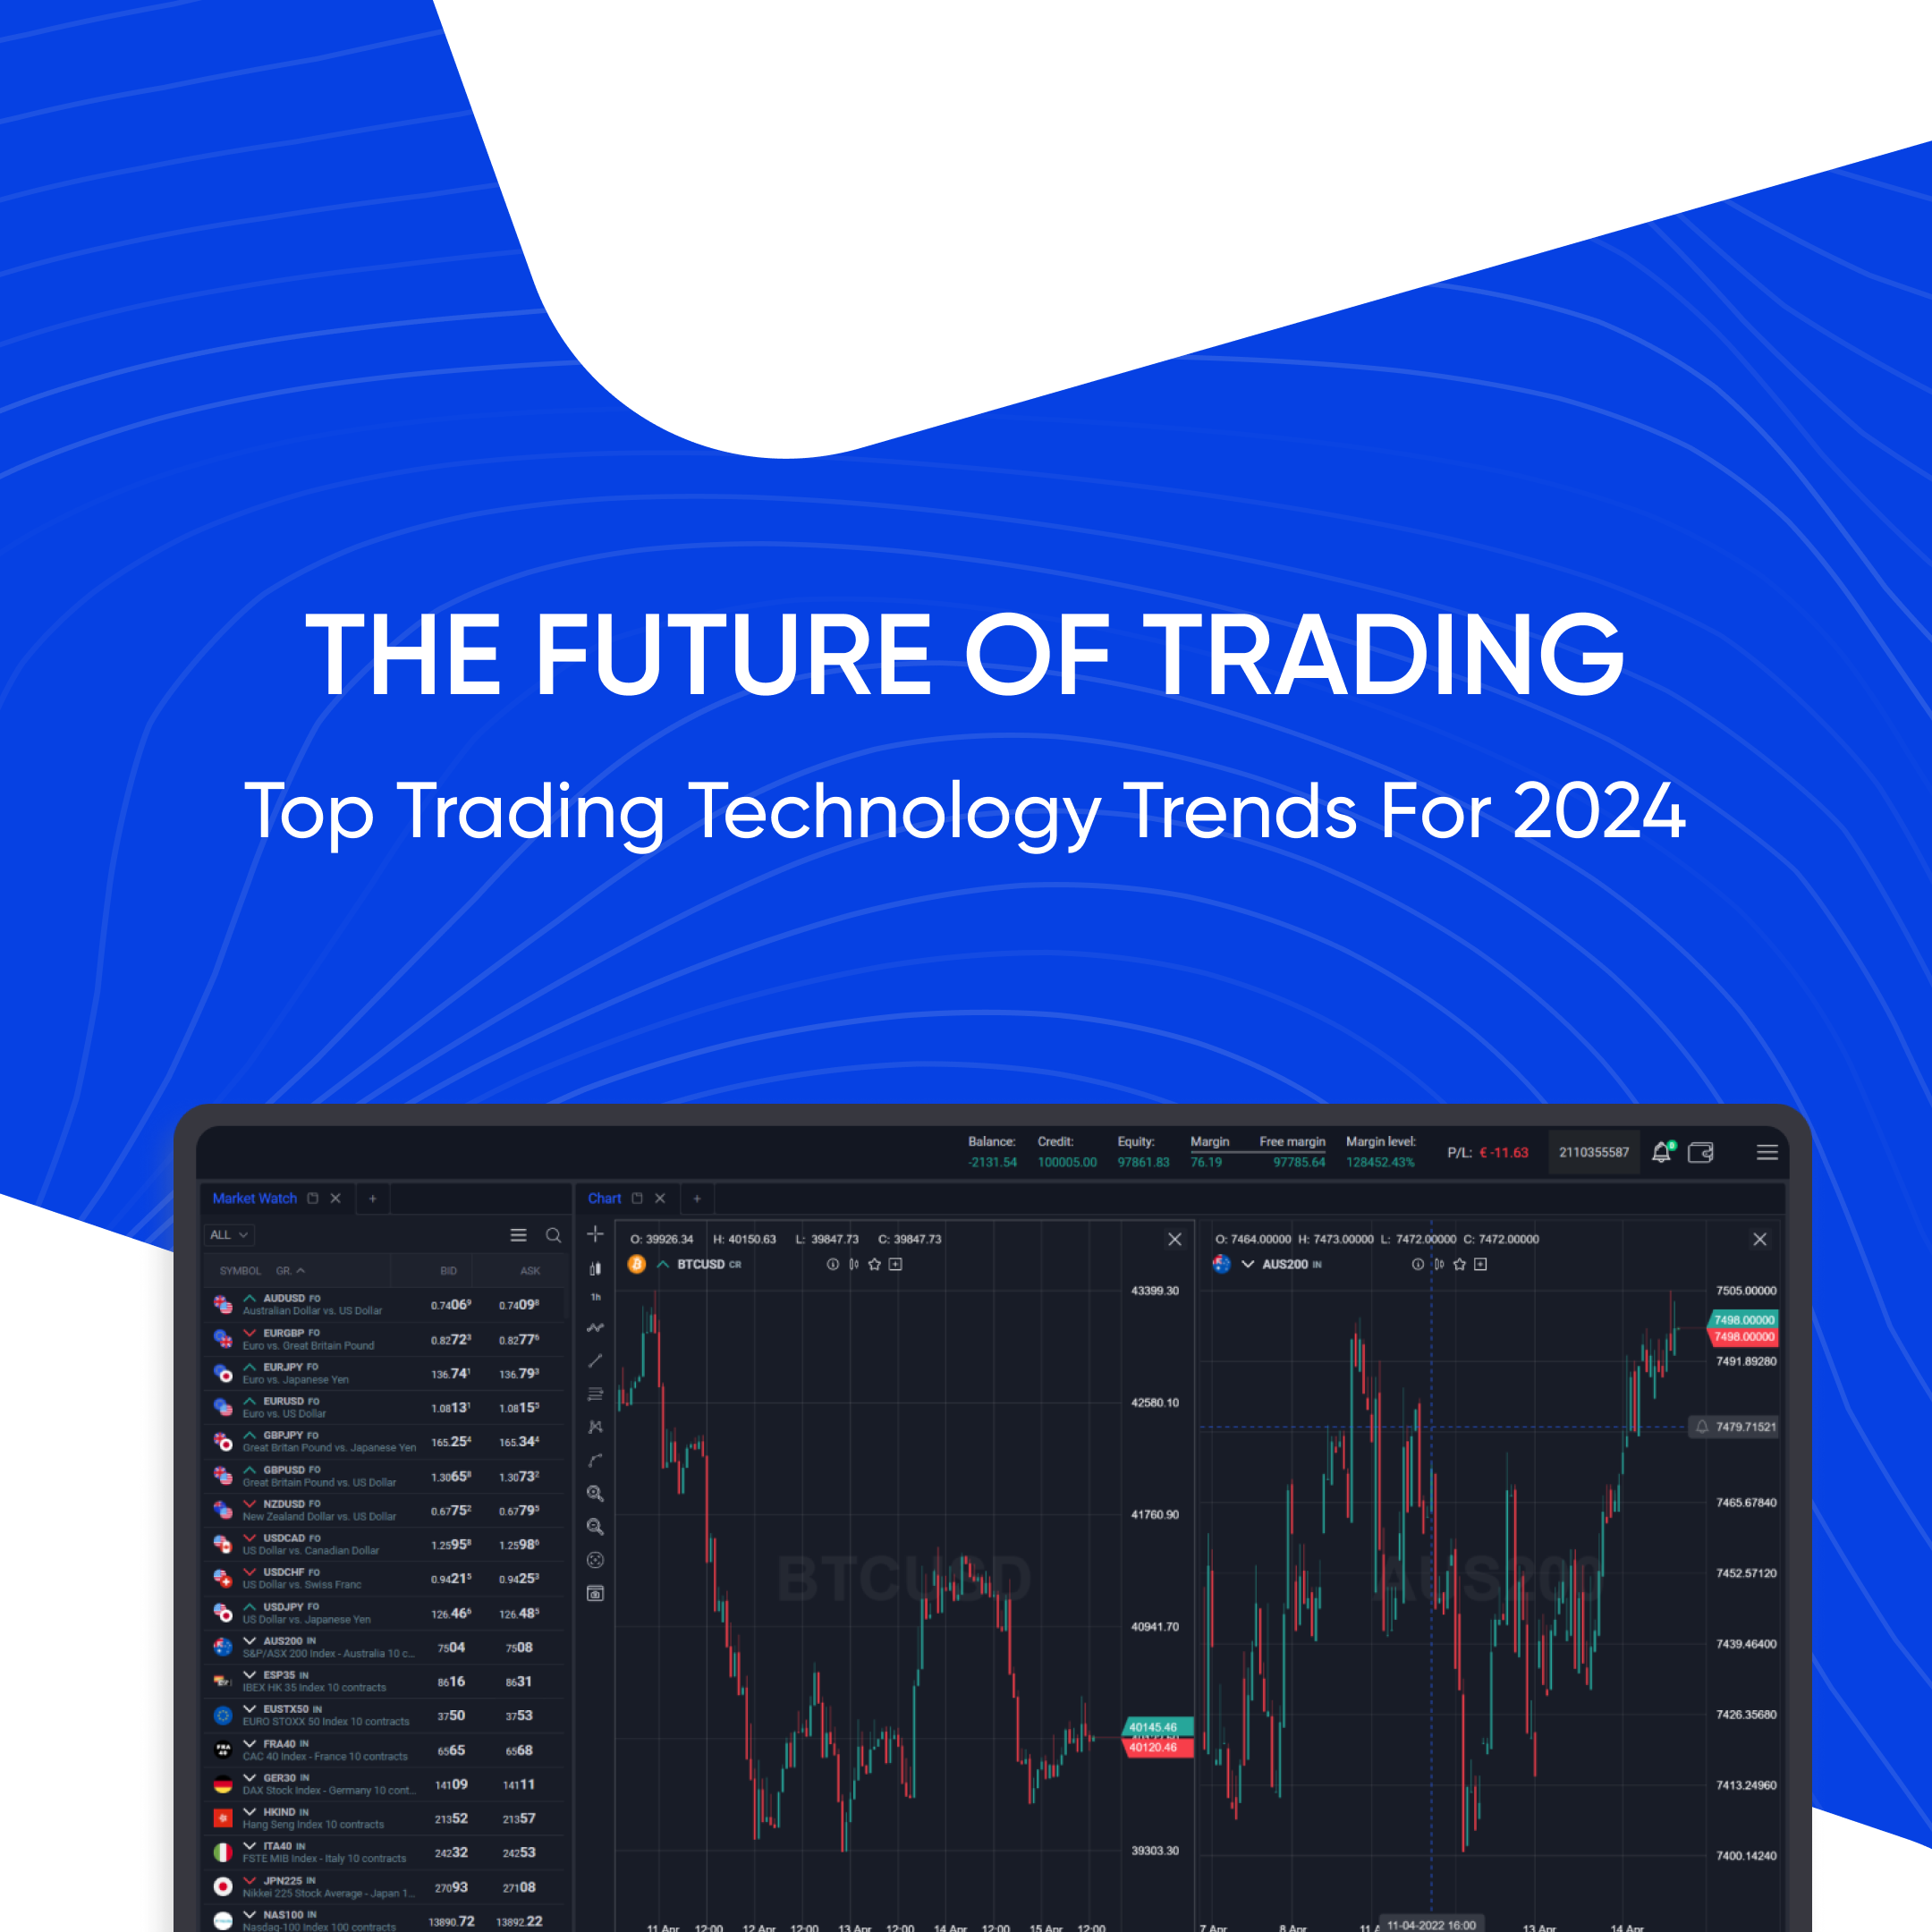 The future of trading. Top Trading Technology Trends For 2024